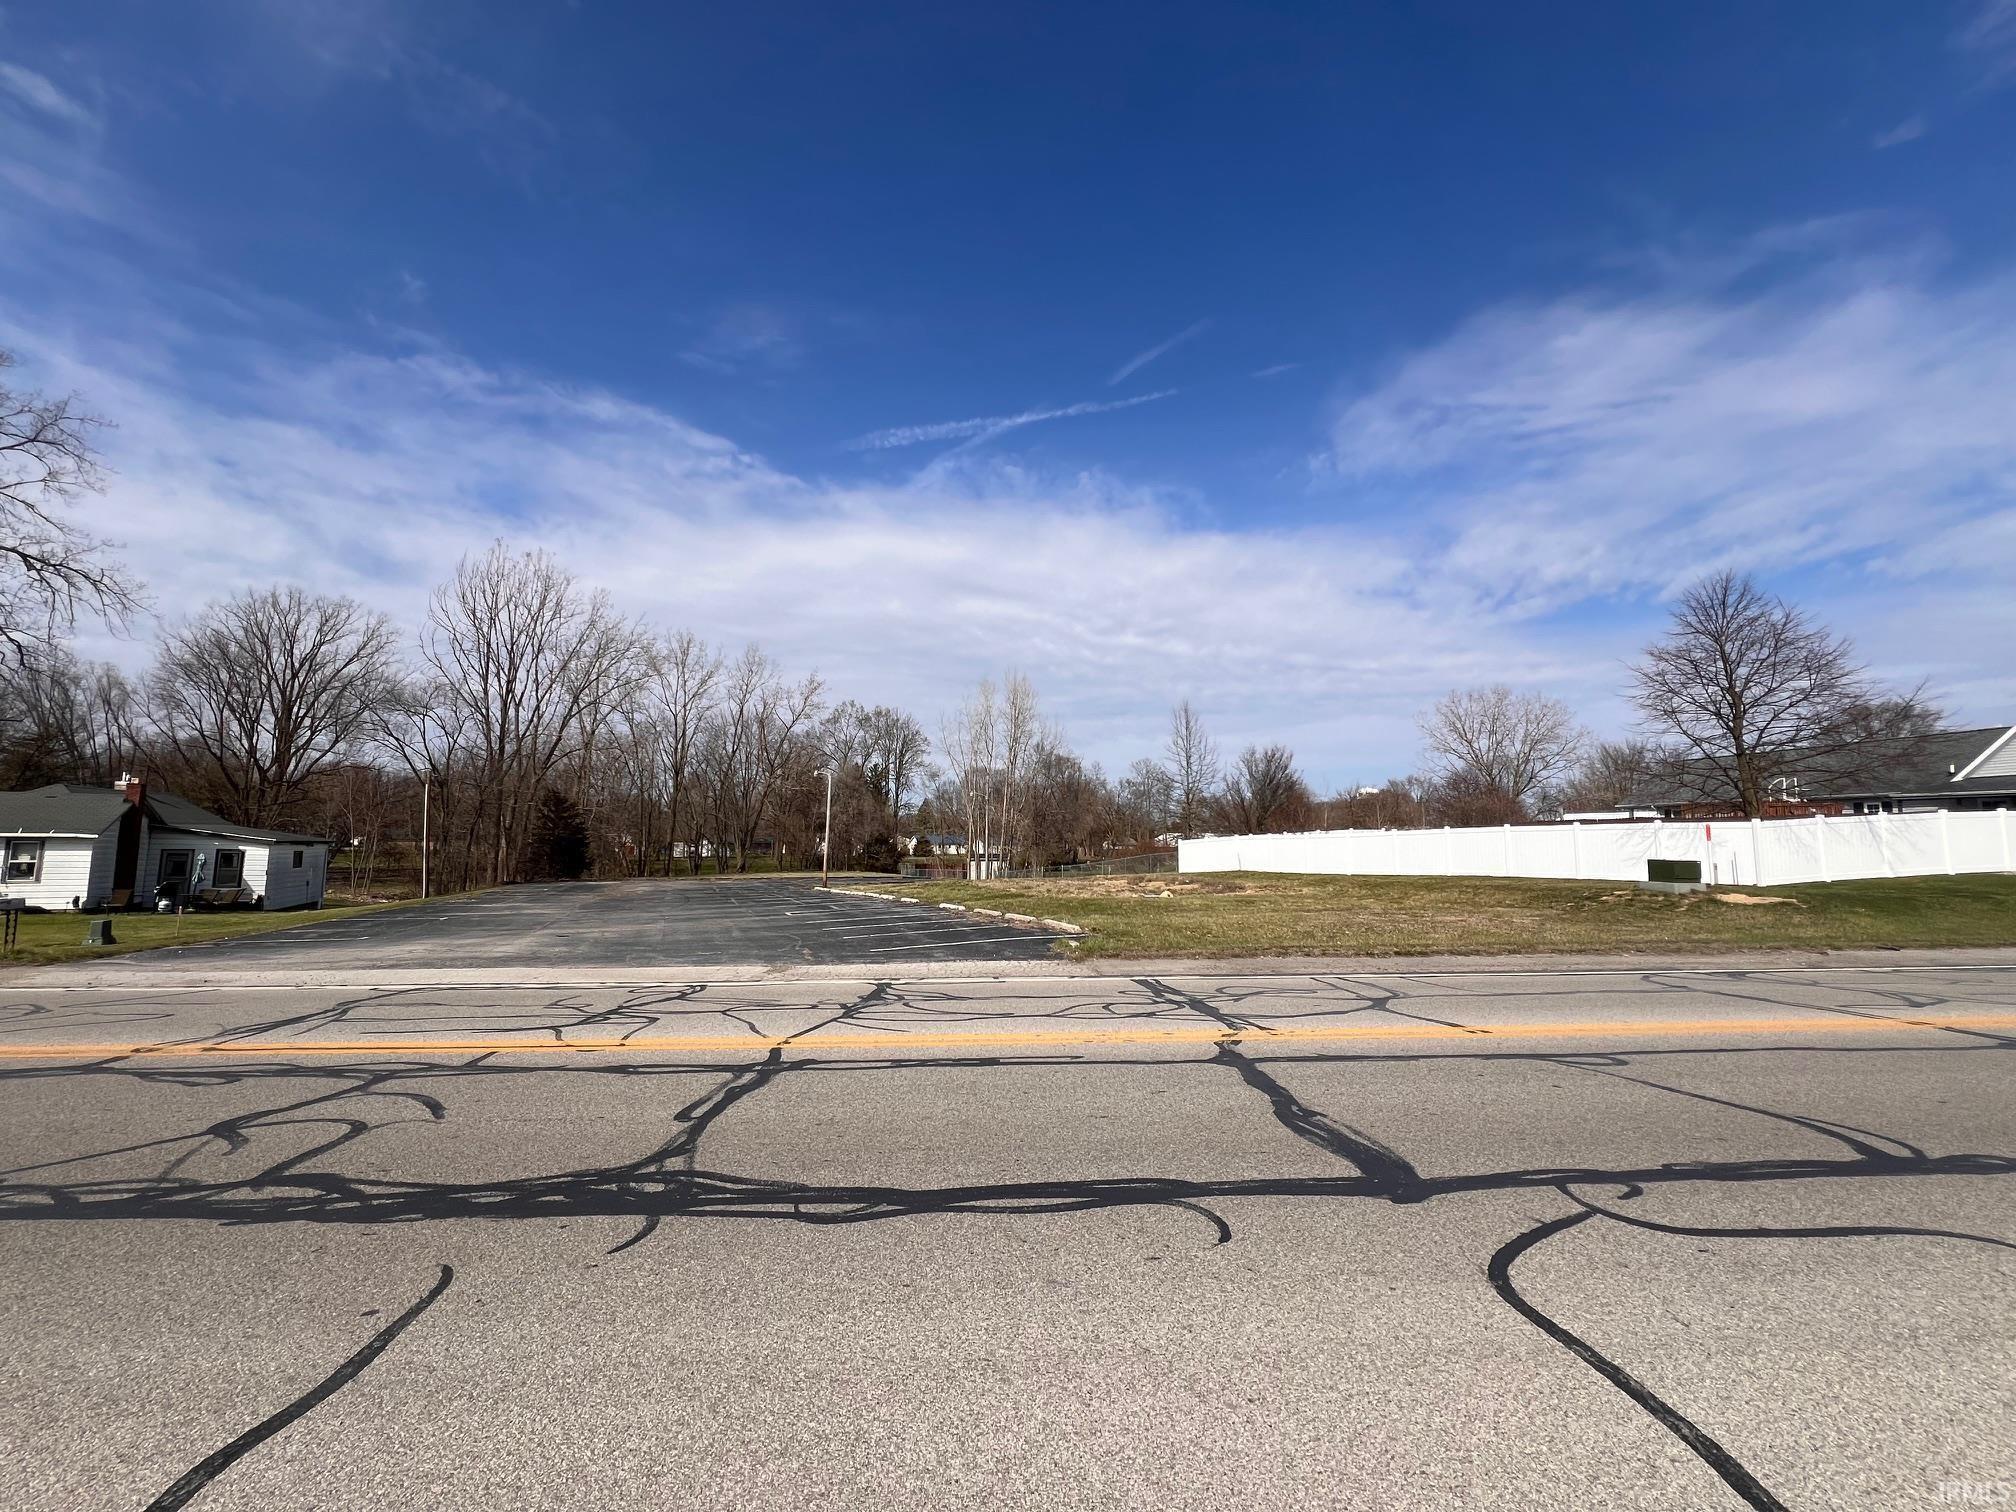 Take a look at this ready to build on double lot in Columbia City. This property offers over an acre of land, and a large paved parking lot that could be used for a future building project.